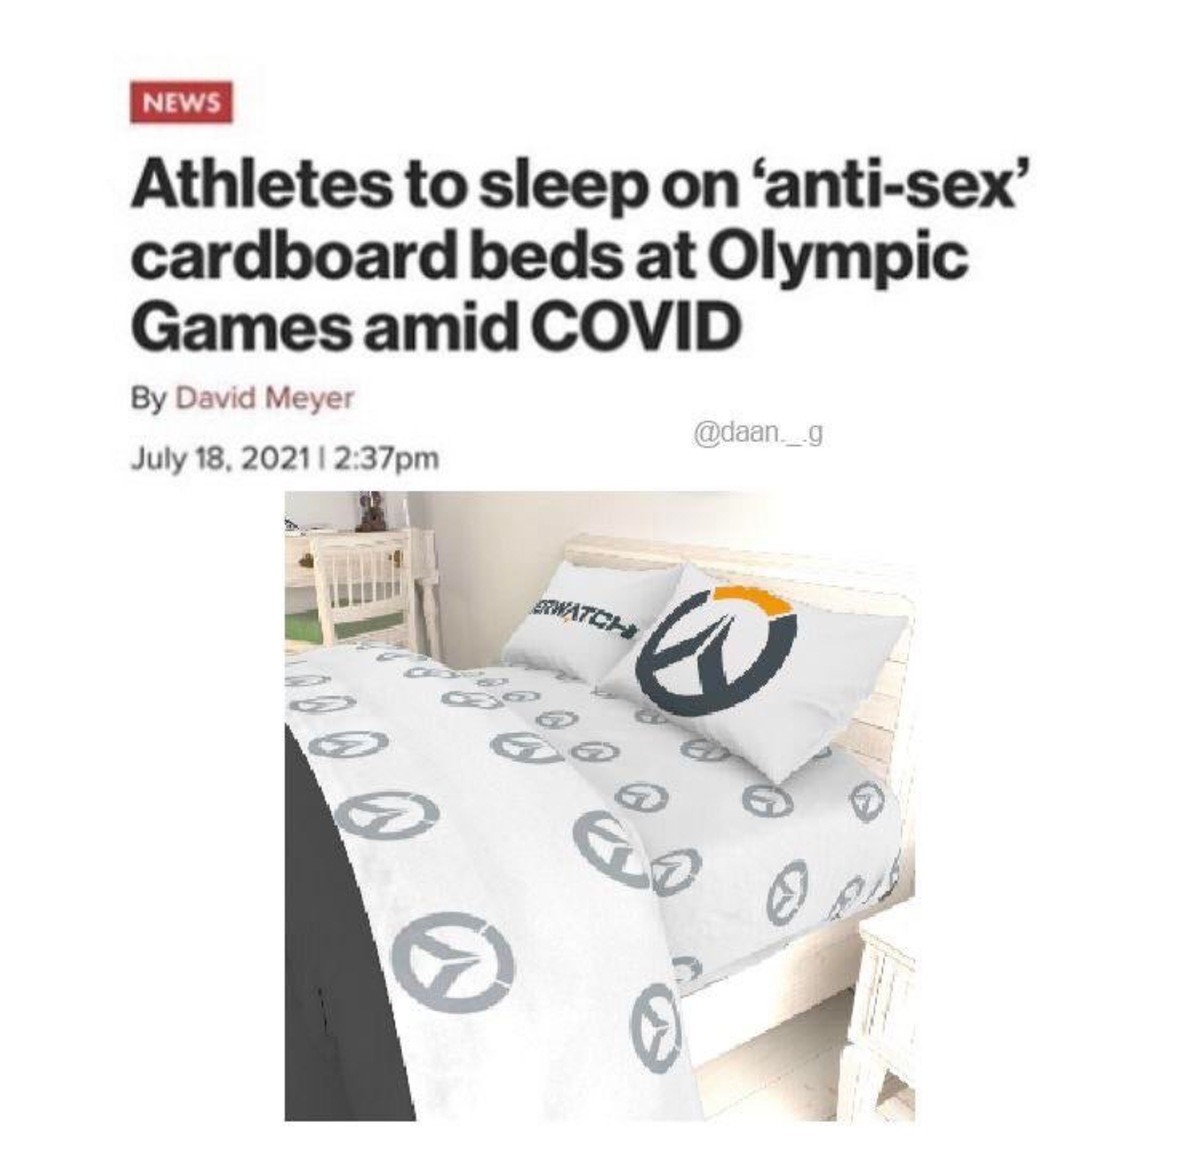 Blizzard Beds. join list: OverwatchStuff (1425 subs)Mention Clicks: 341999Msgs Sent: 2937073Mention History.. cmon man this was proven fake the same day it was made. it's just beds, made from materials. and they tried to get away whit it by calling them anti sex beds cu